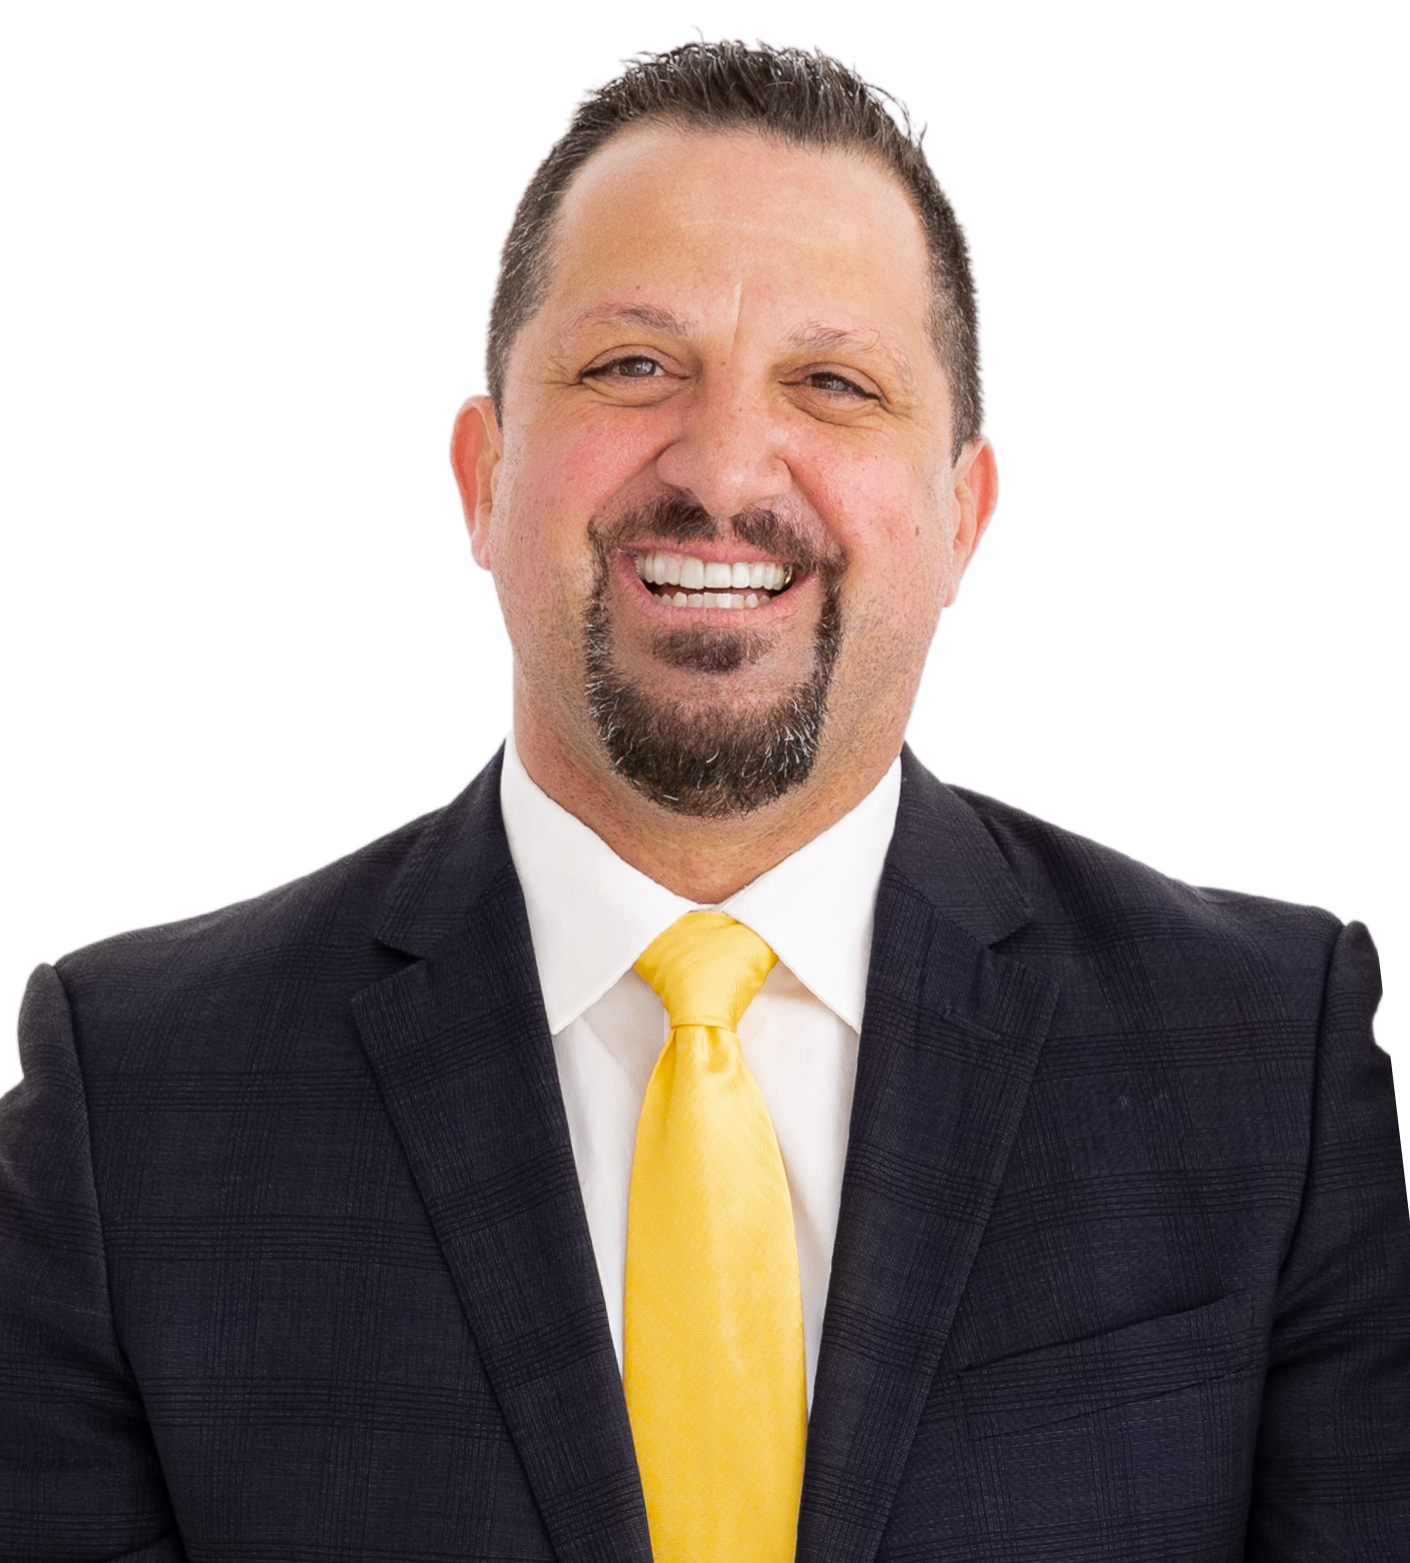 Headshot of Tony Kurtulan wearing a yellow tie, renowned author of 'Million Dollar Sales T.U.N.E. Up' and founder of T.U.N.E. Sales Academy.